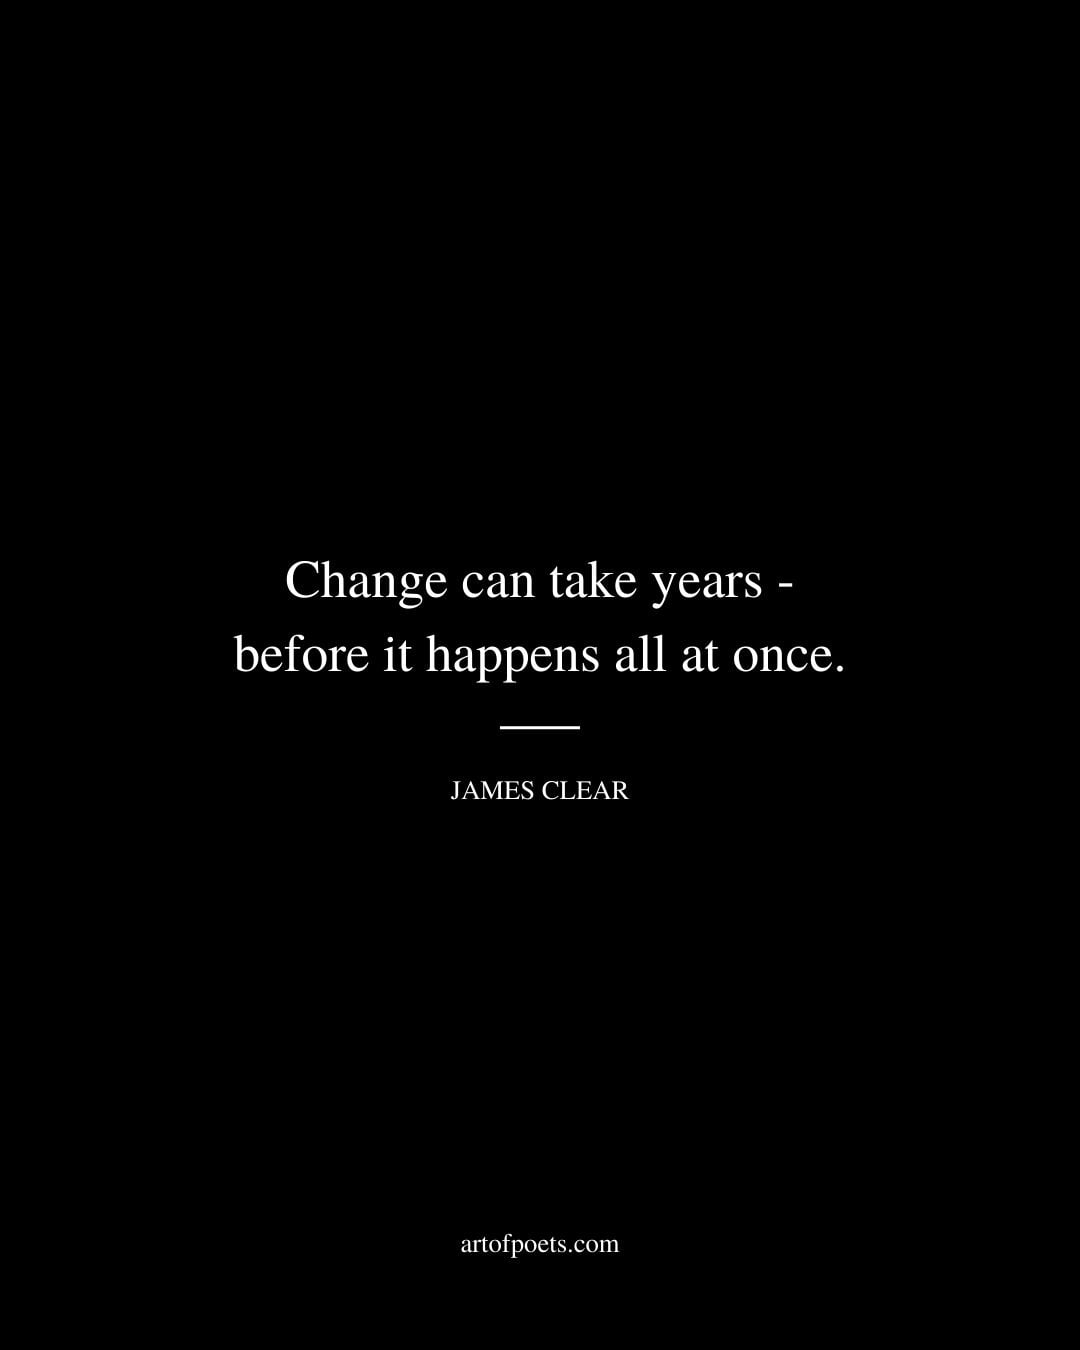 Change can take years—before it happens all at once